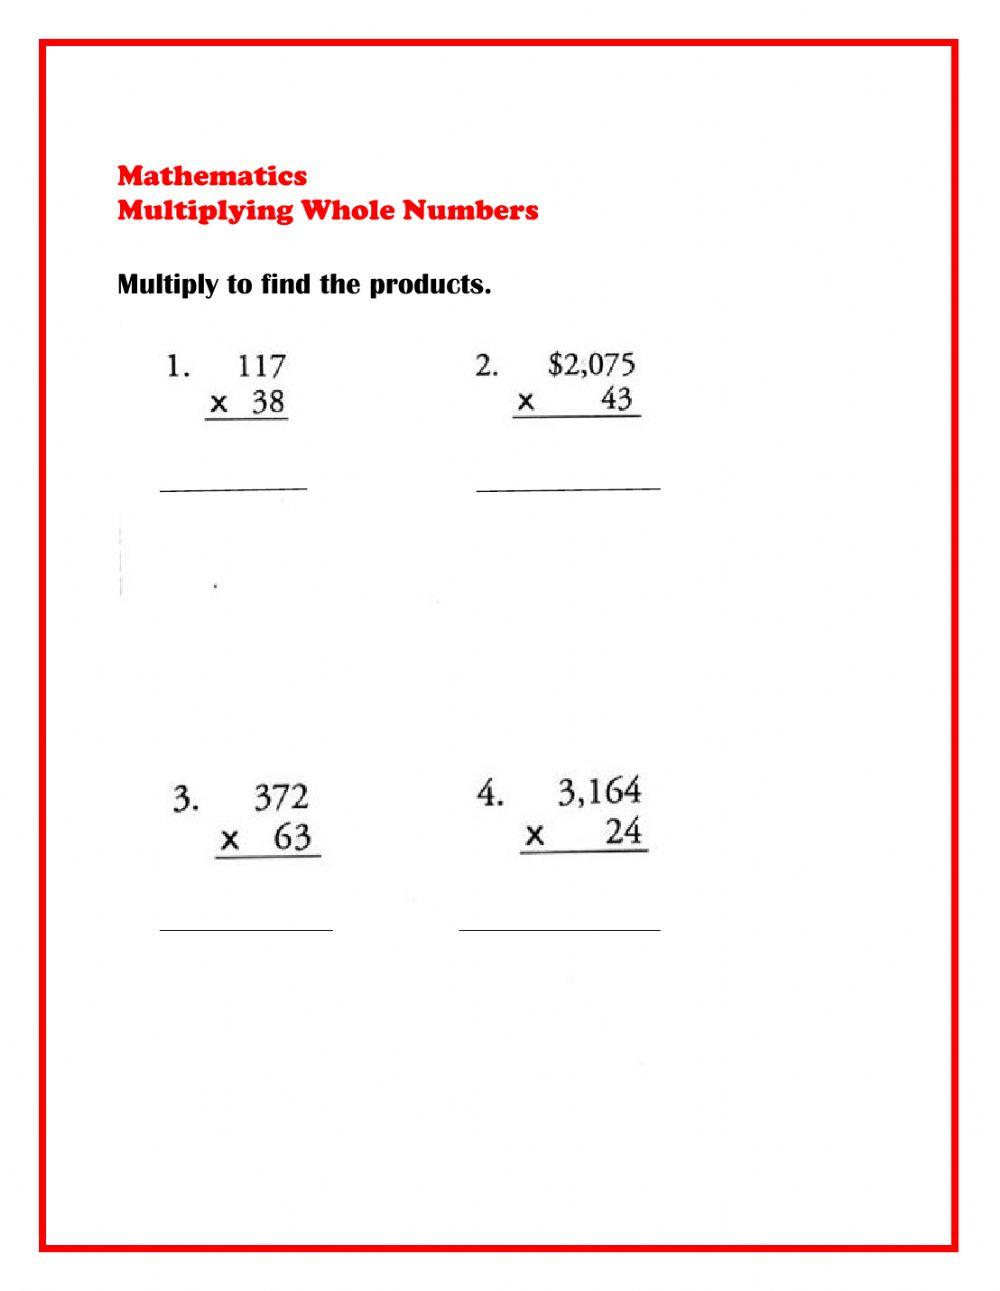 Multiplying Whole NUmbers